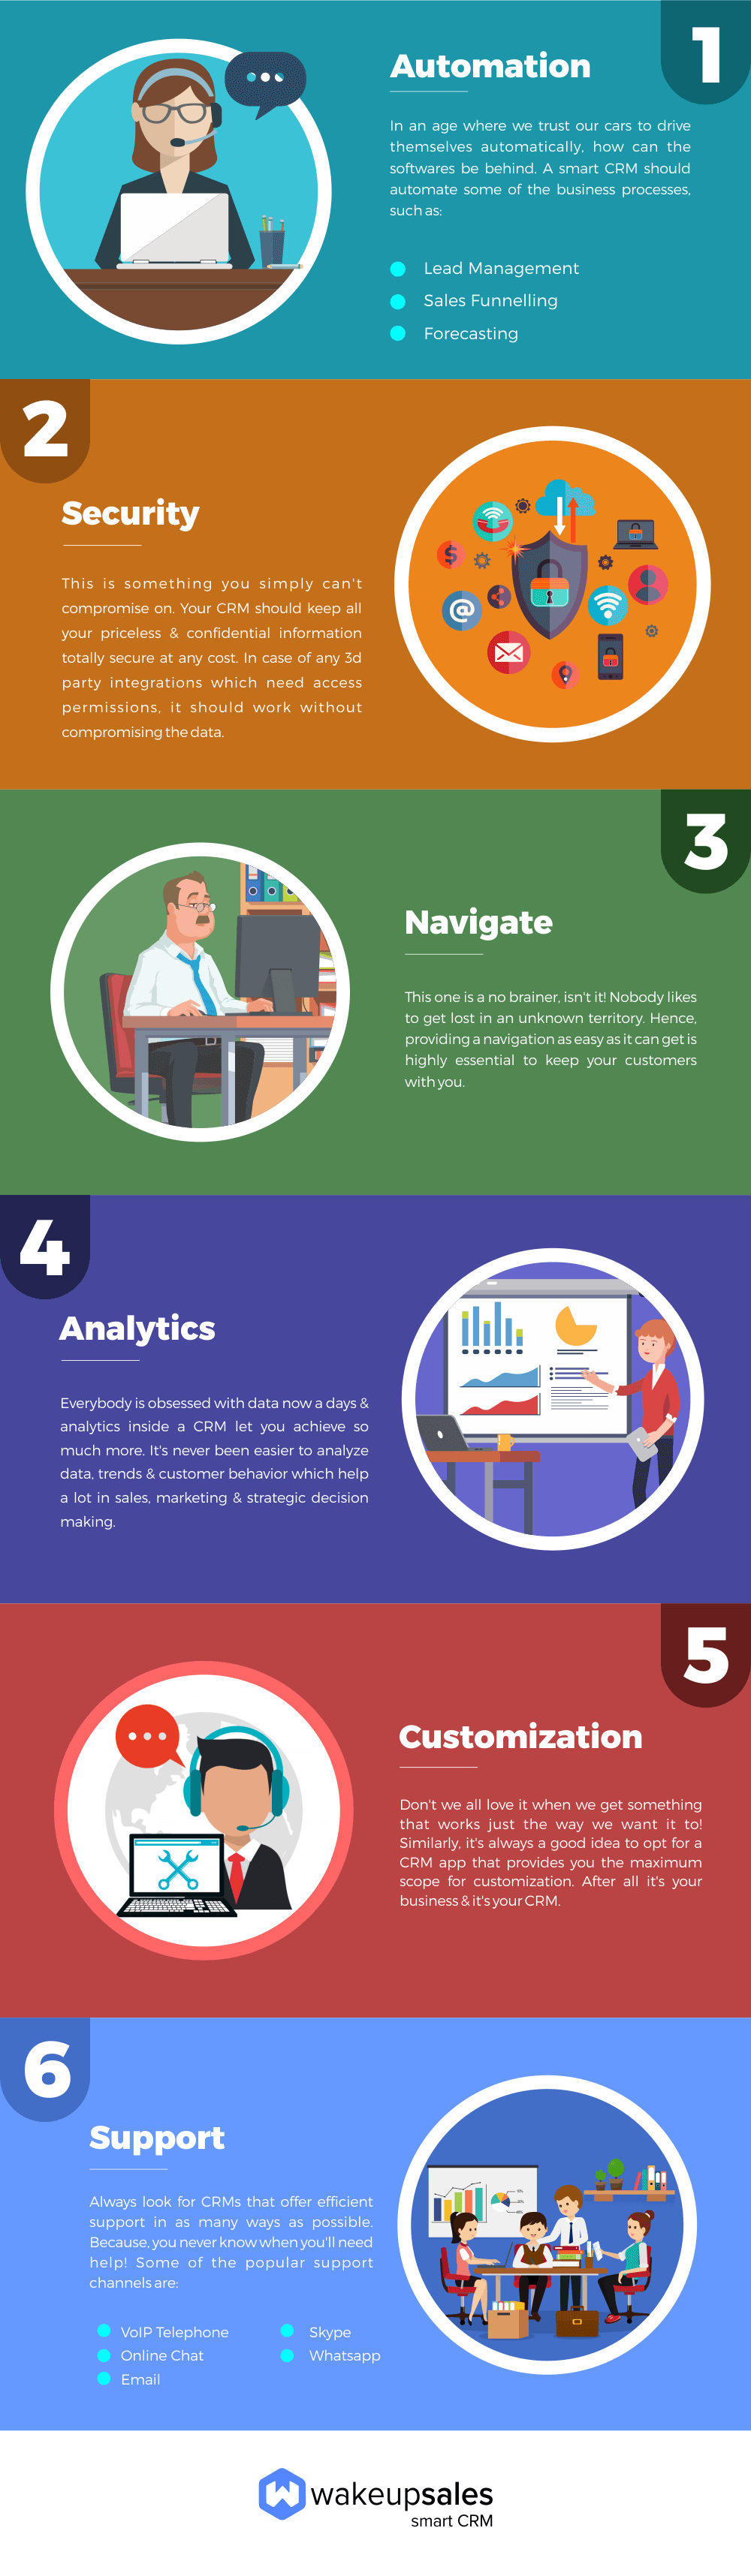 infographic design v1 1What Makes A CRM Effective!